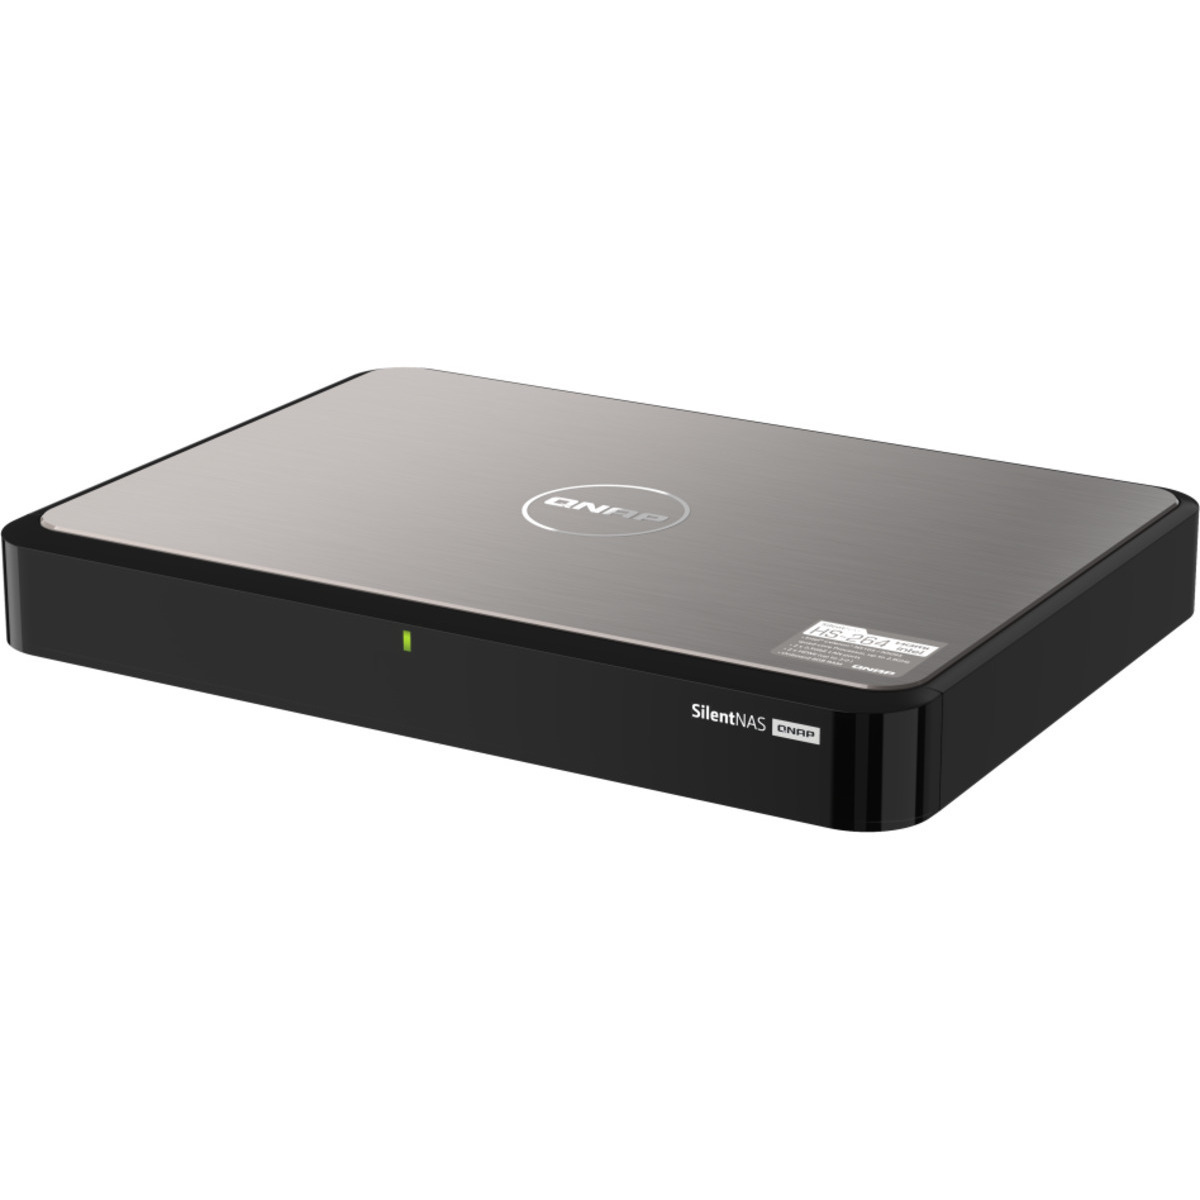 QNAP HS-264 2tb 2-Bay Desktop Multimedia / Power User / Business NAS - Network Attached Storage Device 1x2tb Samsung 870 QVO MZ-77Q2T0 2.5 560/530MB/s SATA 6Gb/s SSD CONSUMER Class Drives Installed - Burn-In Tested HS-264